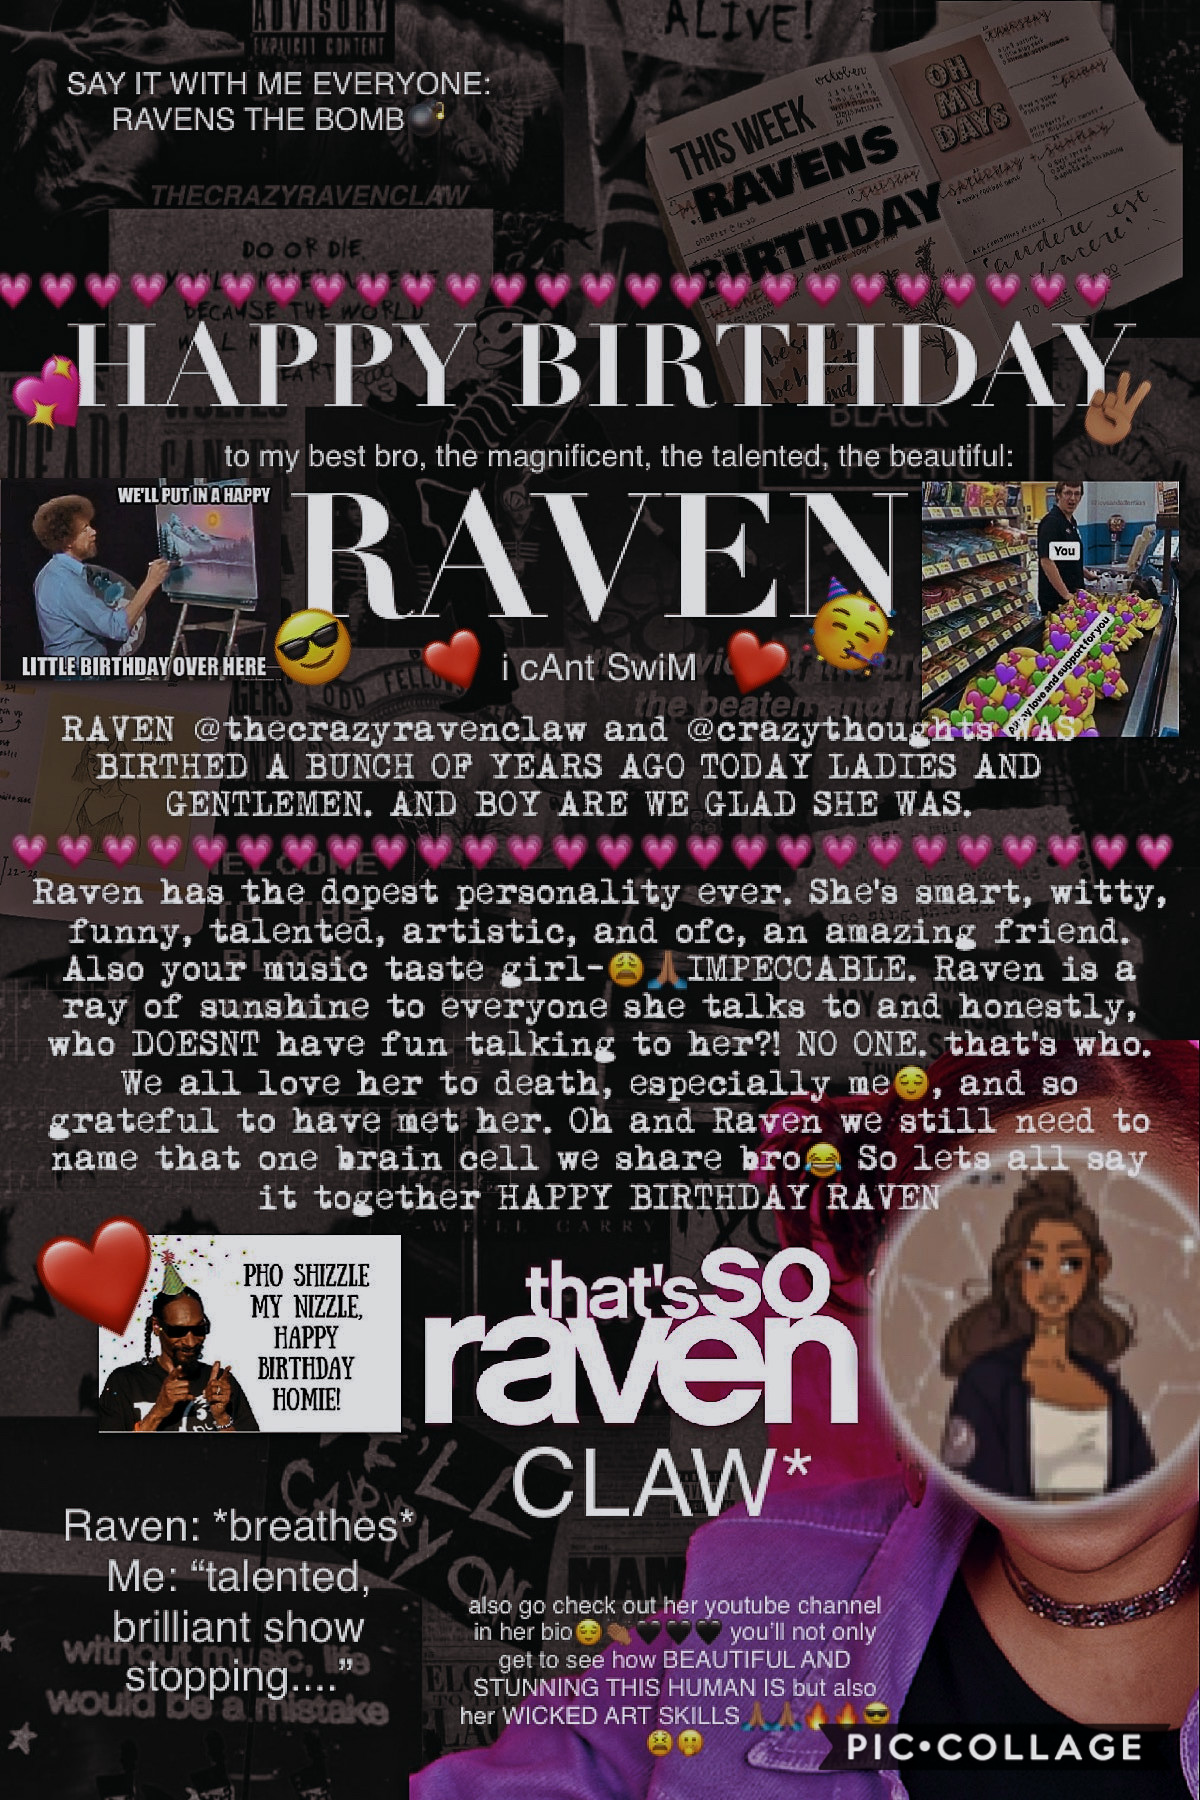 GO WISH HER HBD OR IM GONNA MAKE U LISTEN TO NICKELBACK THE REST YOUR LIFE

now there’s a threat🤡 so maybe u should go do that👀

HAPPY BIRTHDAY RAVENNN🥳🥳

(i can’t swim) gEt iT. viNe rEFerEnce